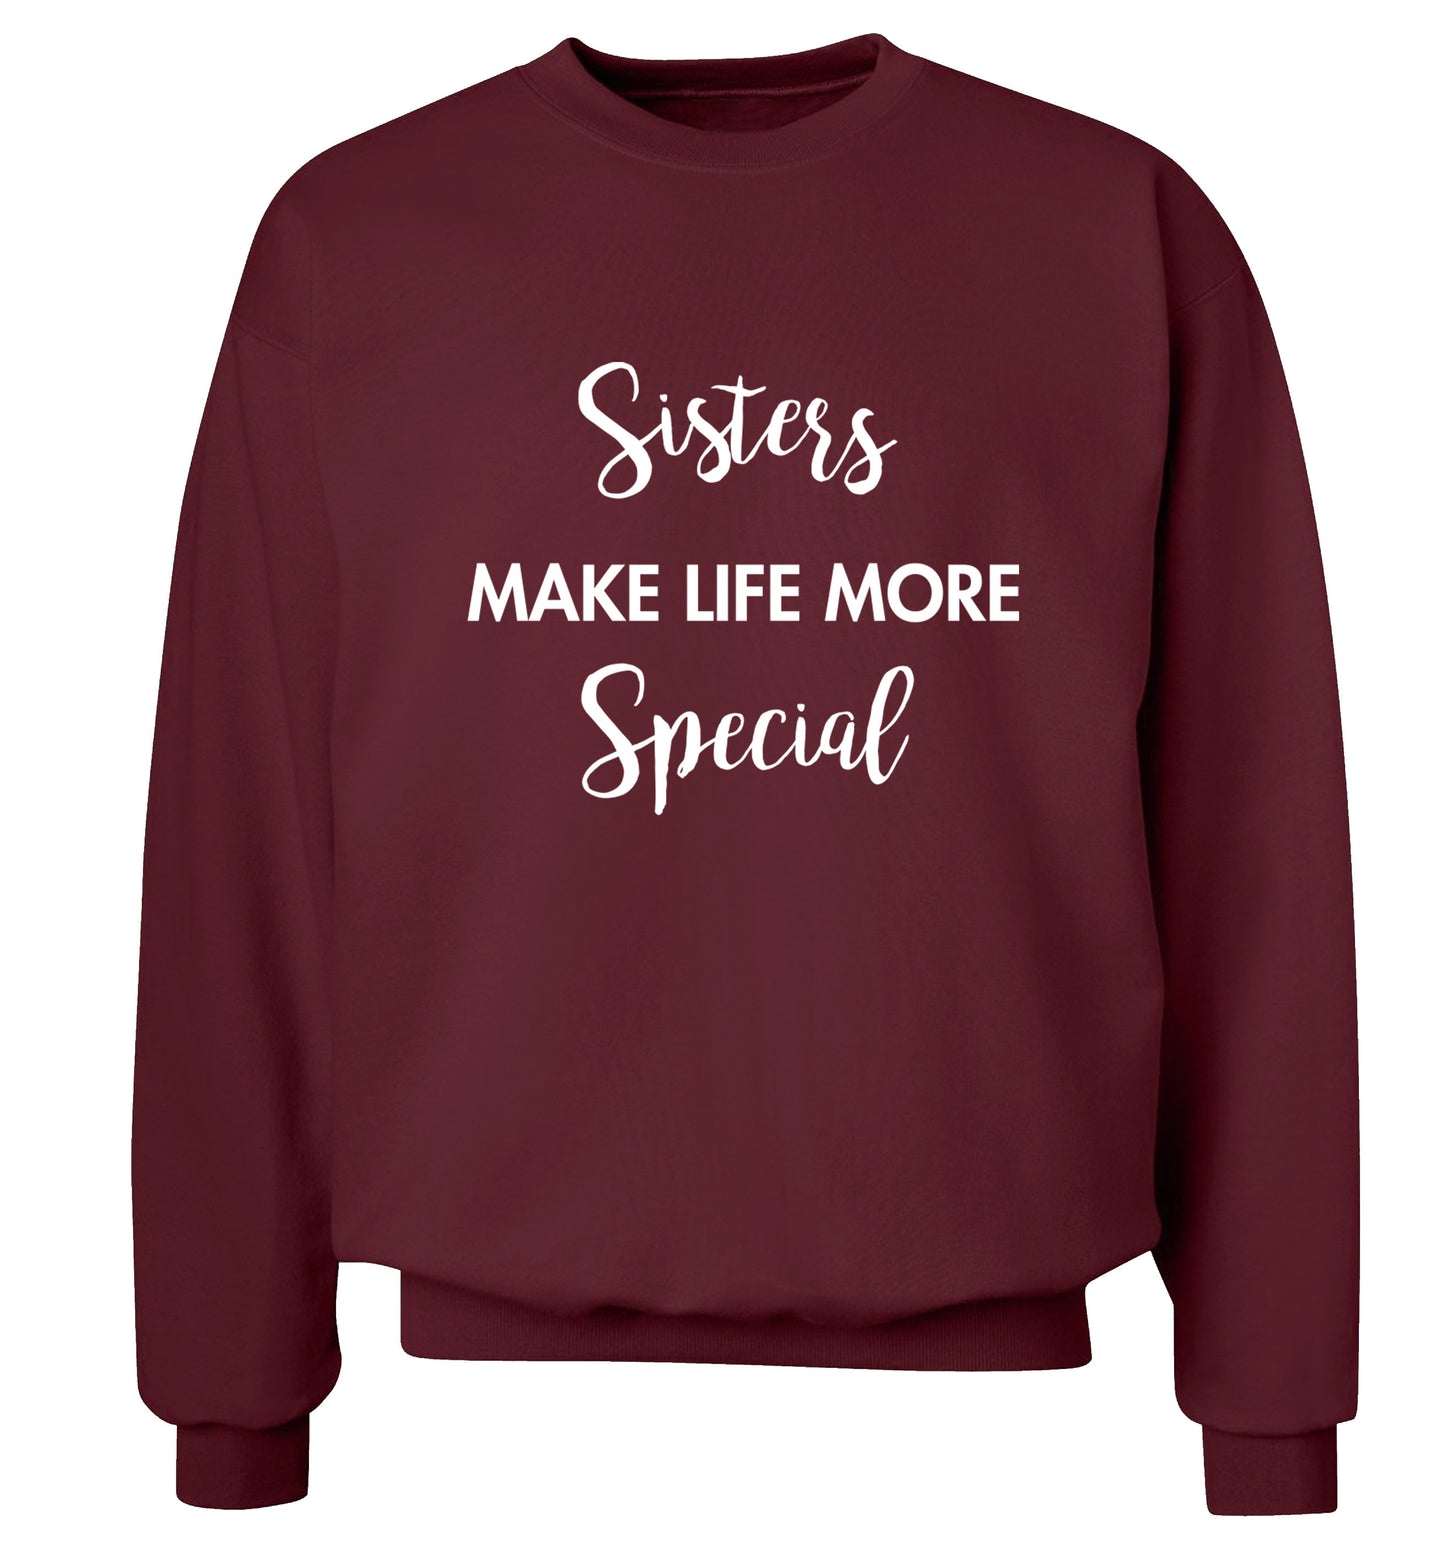 Sisters make life more special Adult's unisex maroon Sweater 2XL